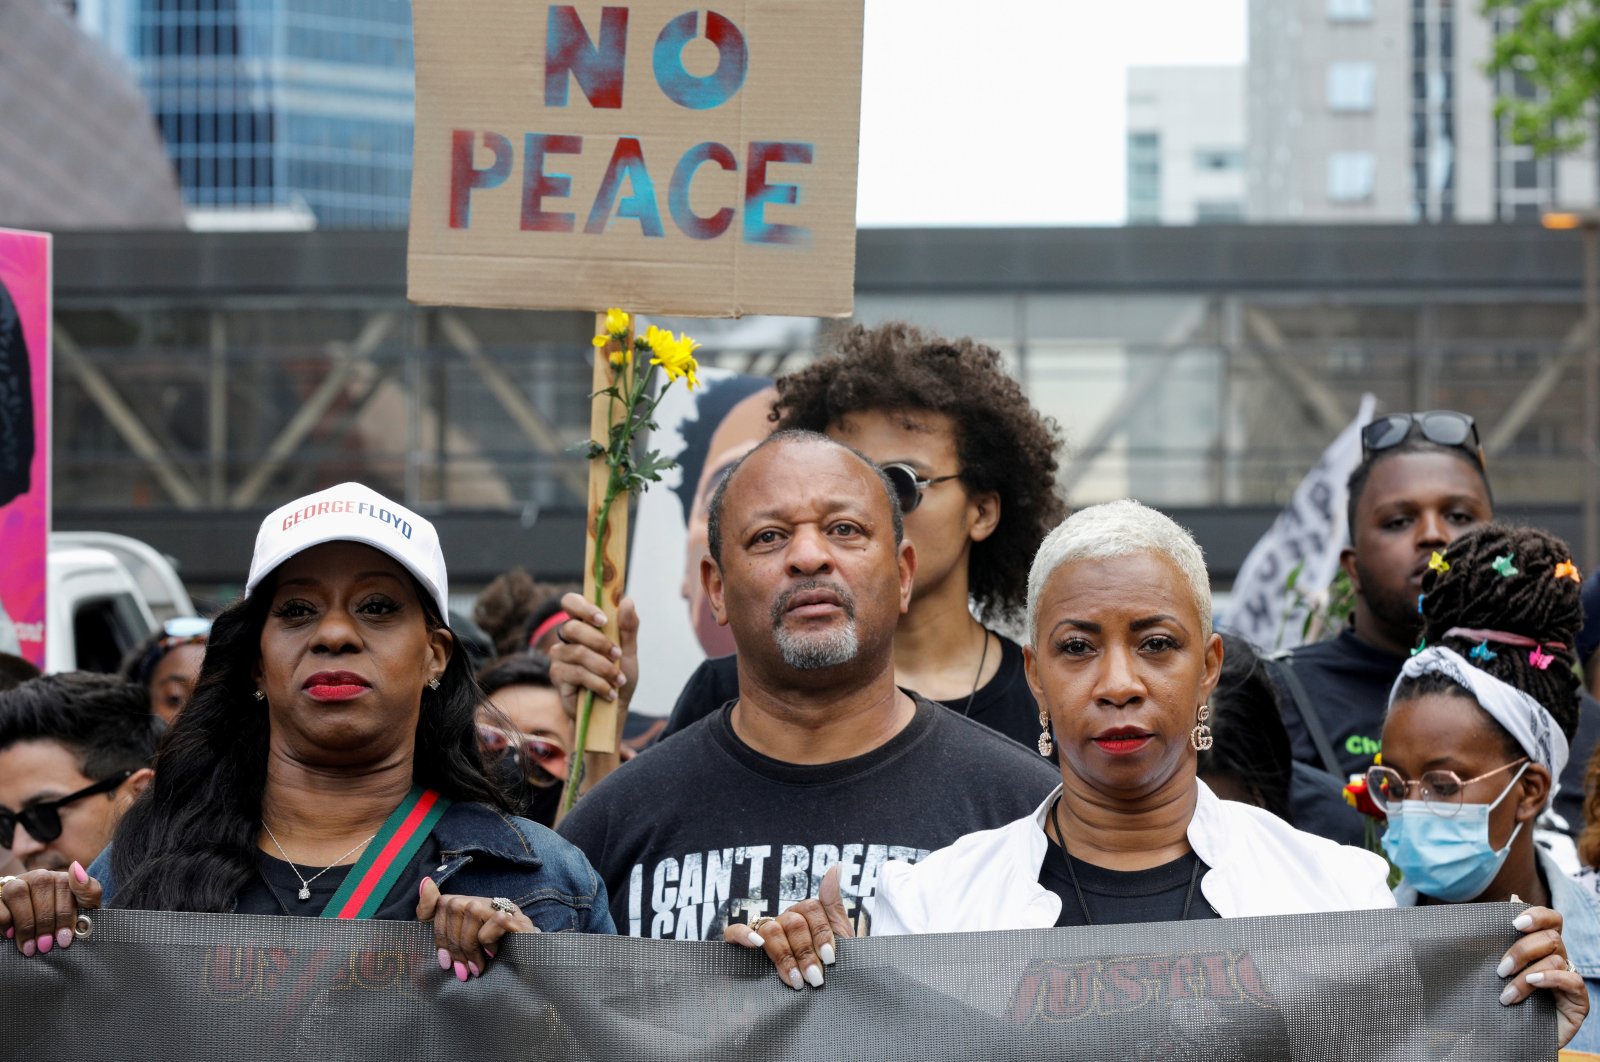 George Floyd's cousin Shareeduh Tate (front R) holds a banner while marching with others during the "One Year, What's Changed?" rally hosted by the George Floyd Global Memorial to commemorate the first anniversary of his death, outside the Hennepin County Government Center in Minneapolis, Minnesota, U.S., May 23, 2021. (Reuters Photo)